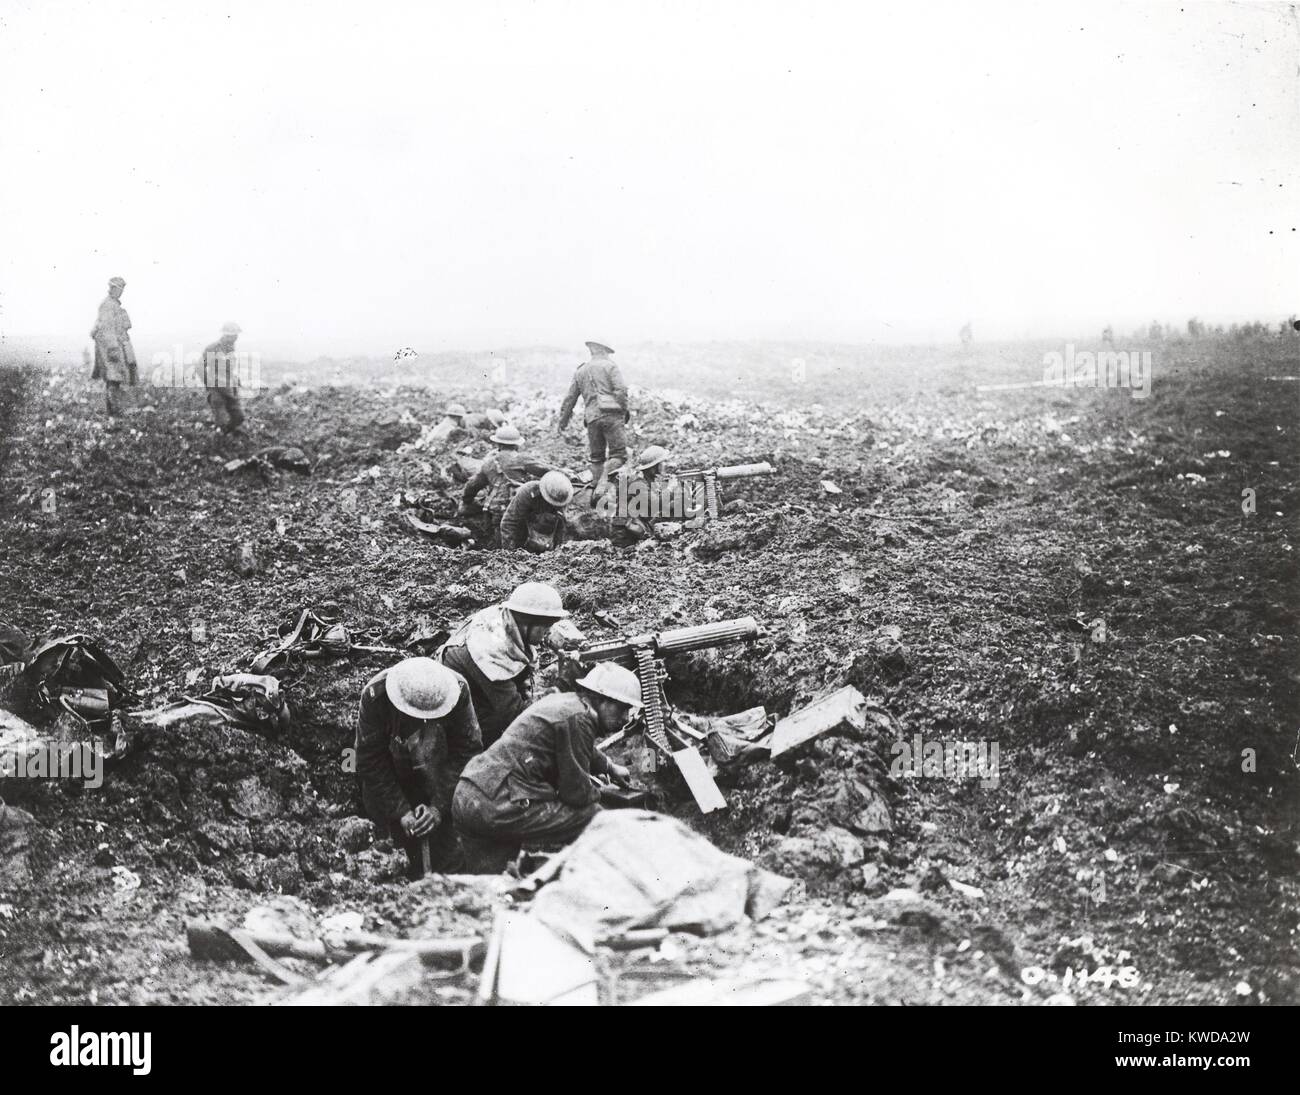 World War 1. Battle of Arras (April 9-12, 1917). Canadian machine gunners dig themselves into shell holes on Vimy Ridge. From this position they will support the infantry. April 9, 1917. (BSLOC 2013 1 139) Stock Photo